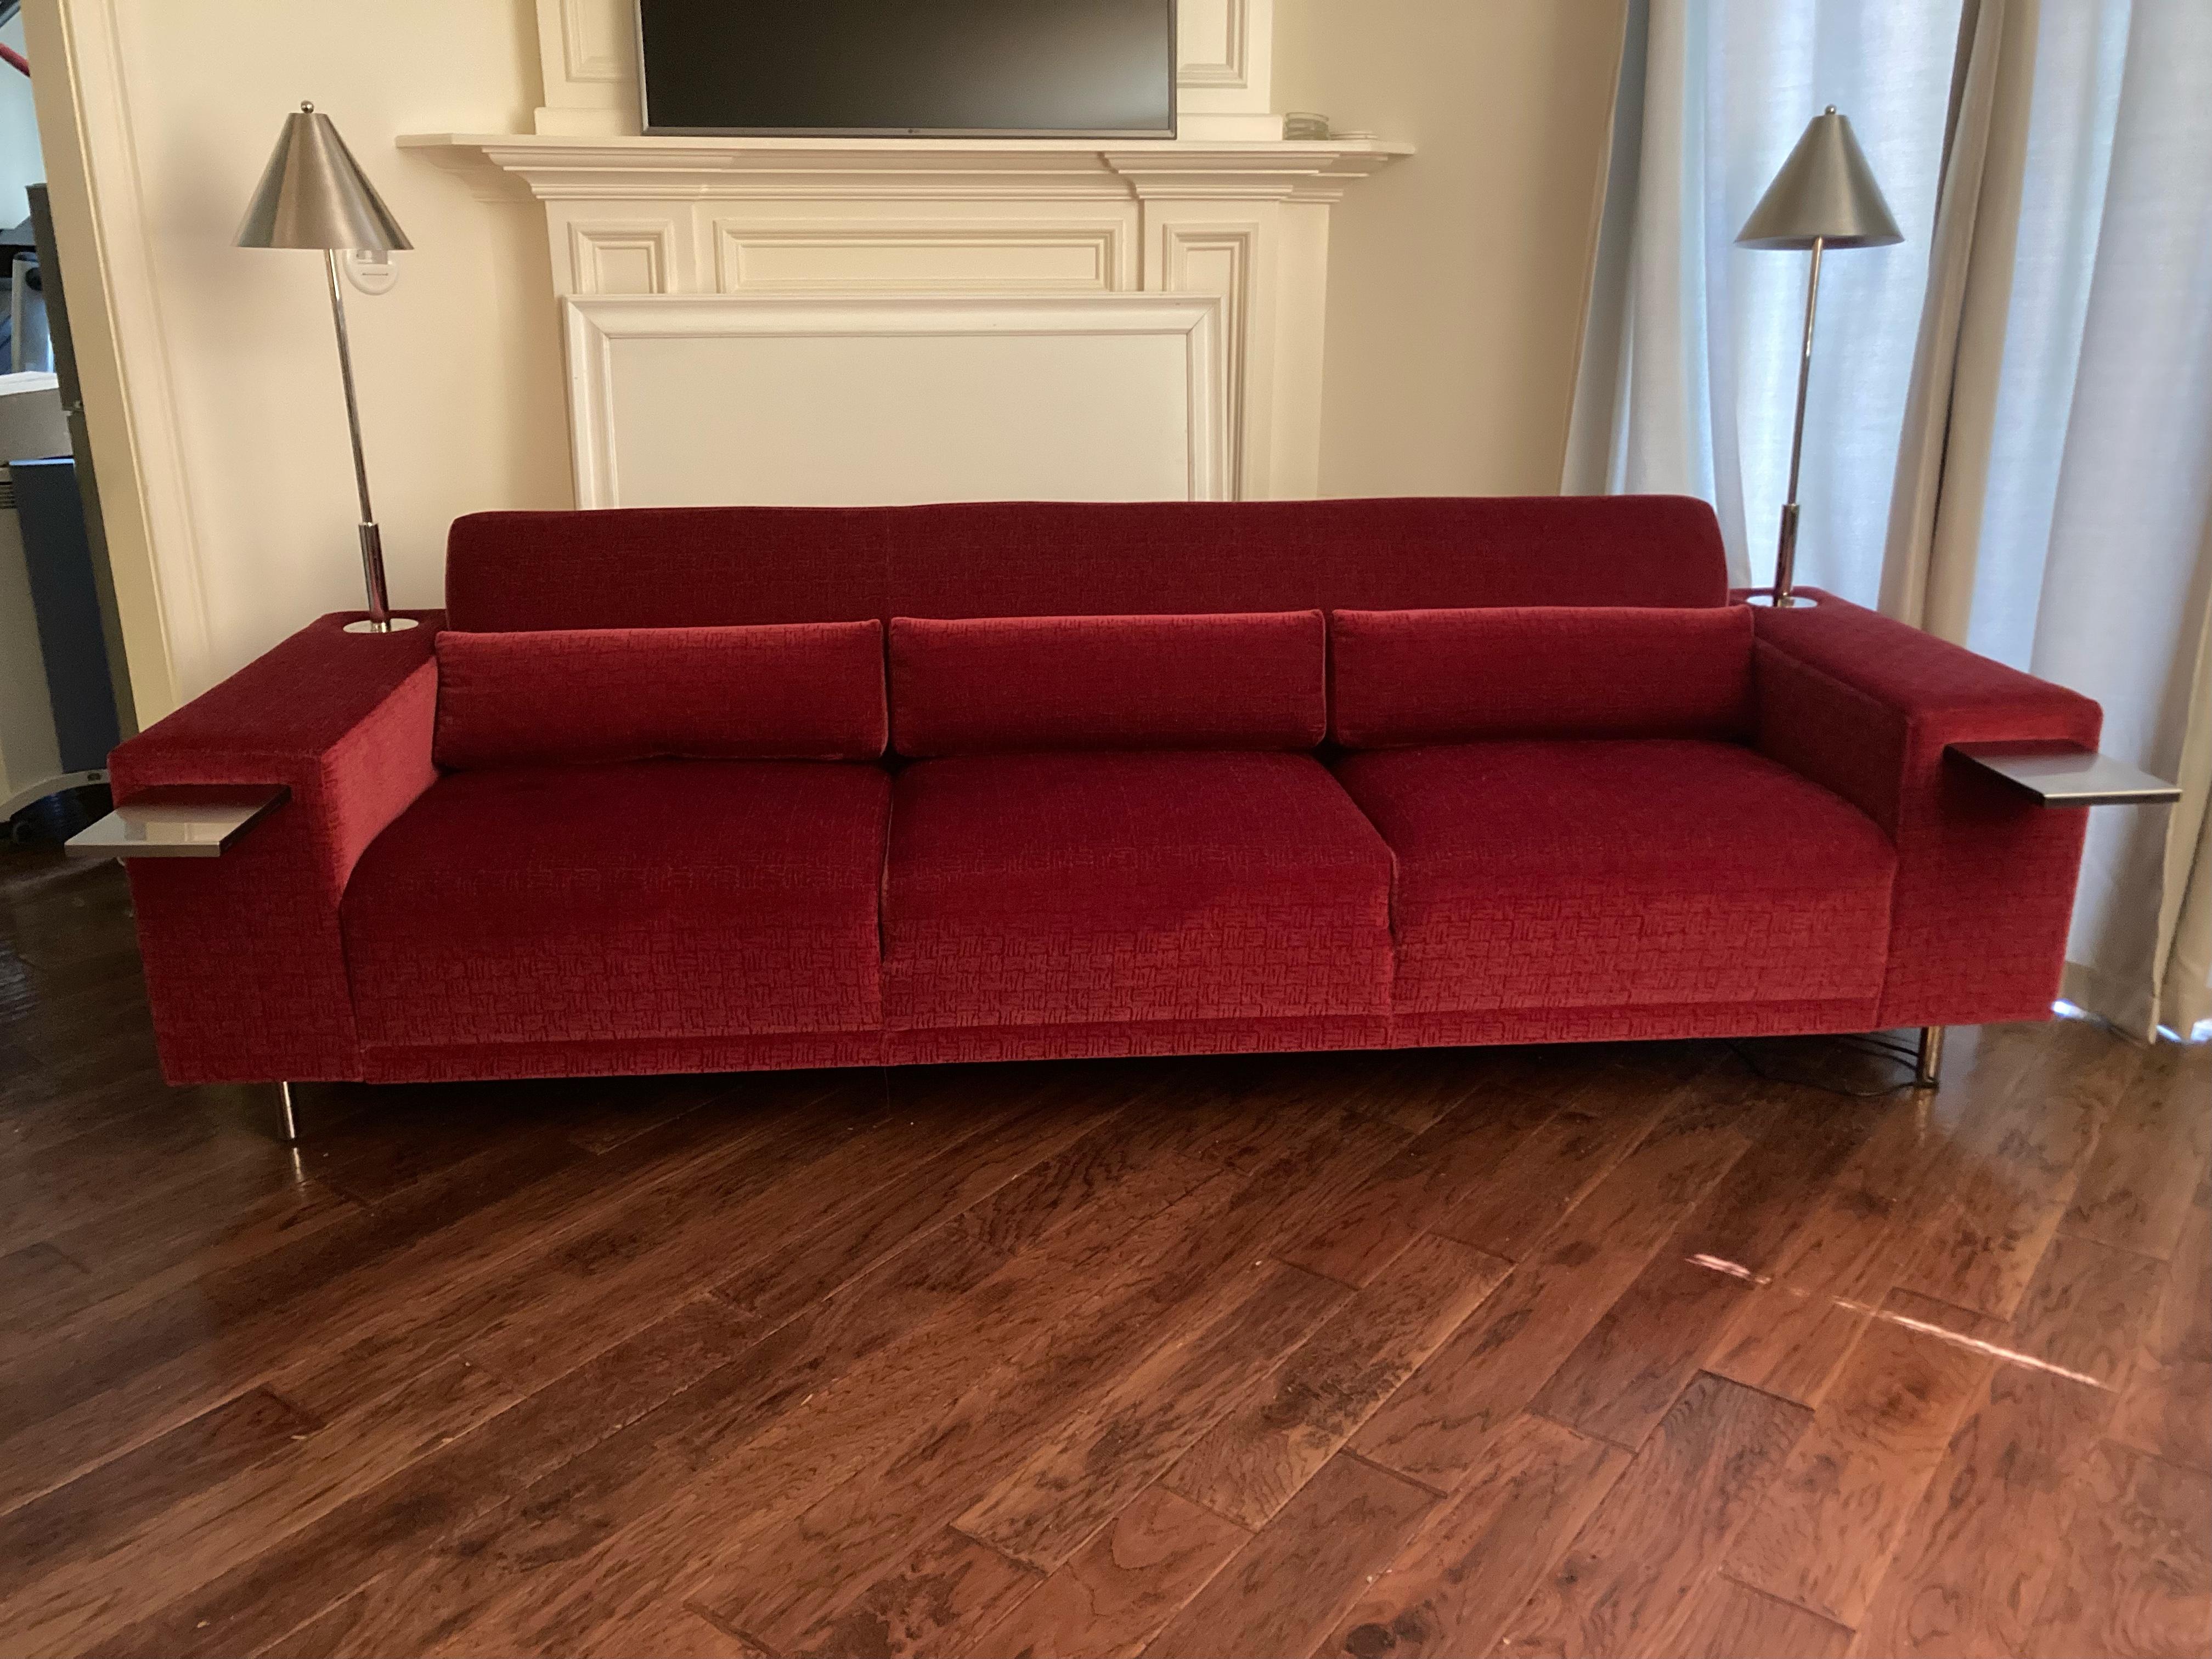 Sofa is part of Brueton’s “America” seating, a collection featuring brushed stainless reading lamps, pull out trays and 3 removable kidney pillows. 
Lamps are stainless steel with a satin finish. Upholstery is a soft mohair like raspberry.
Arm